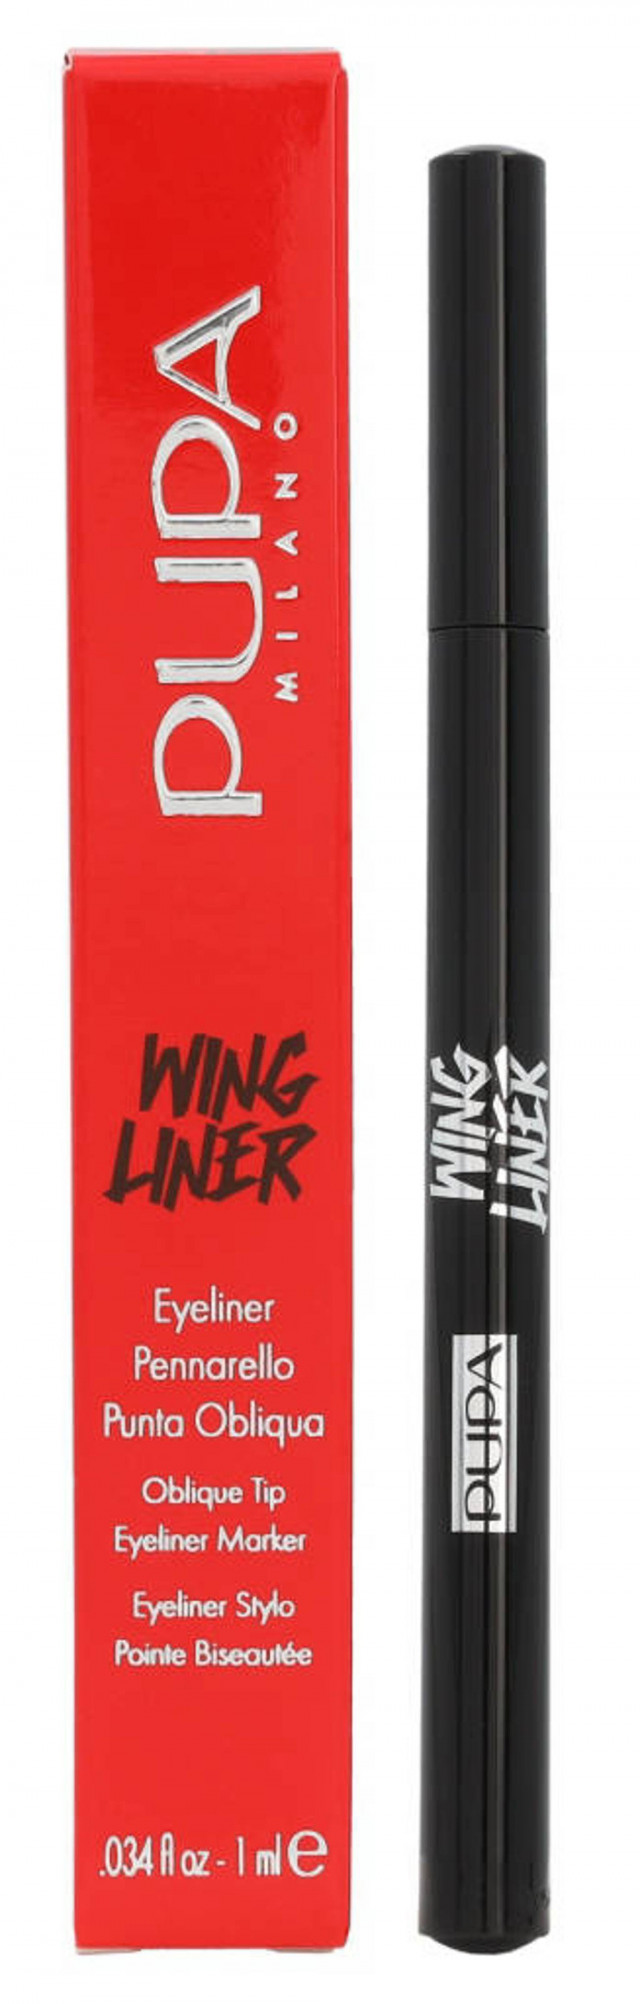 Wing liner